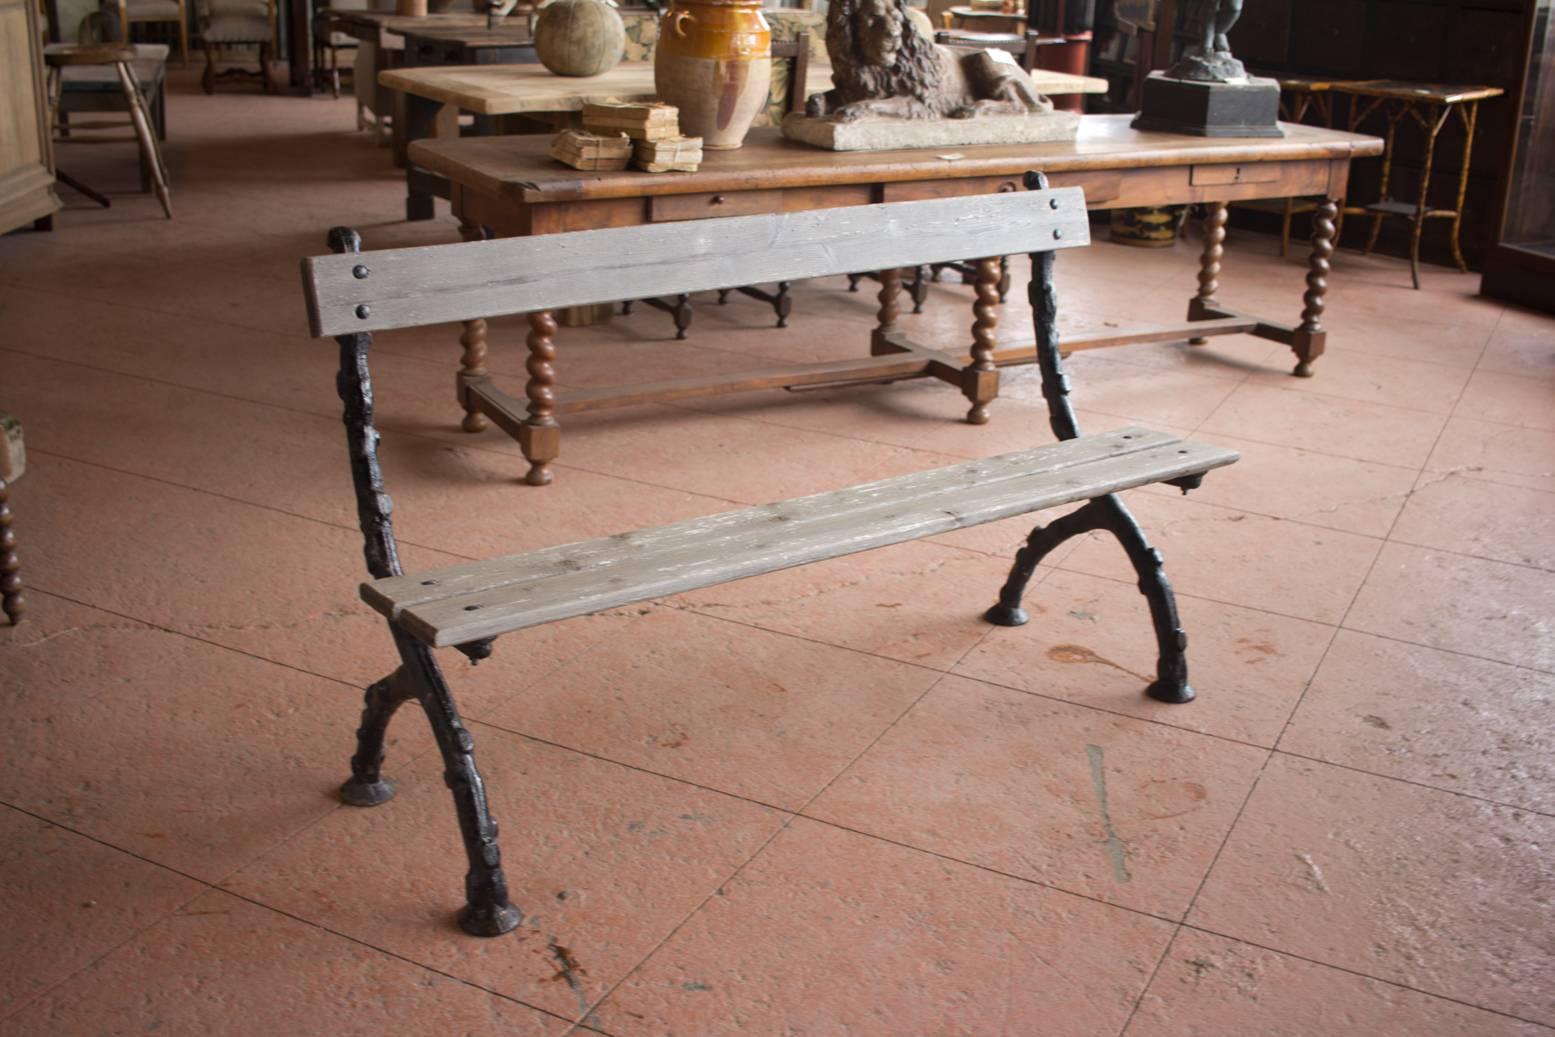 Lovely vintage English faux bois (false wood) cast iron garden bench with wooden slats secured with original iron studs.